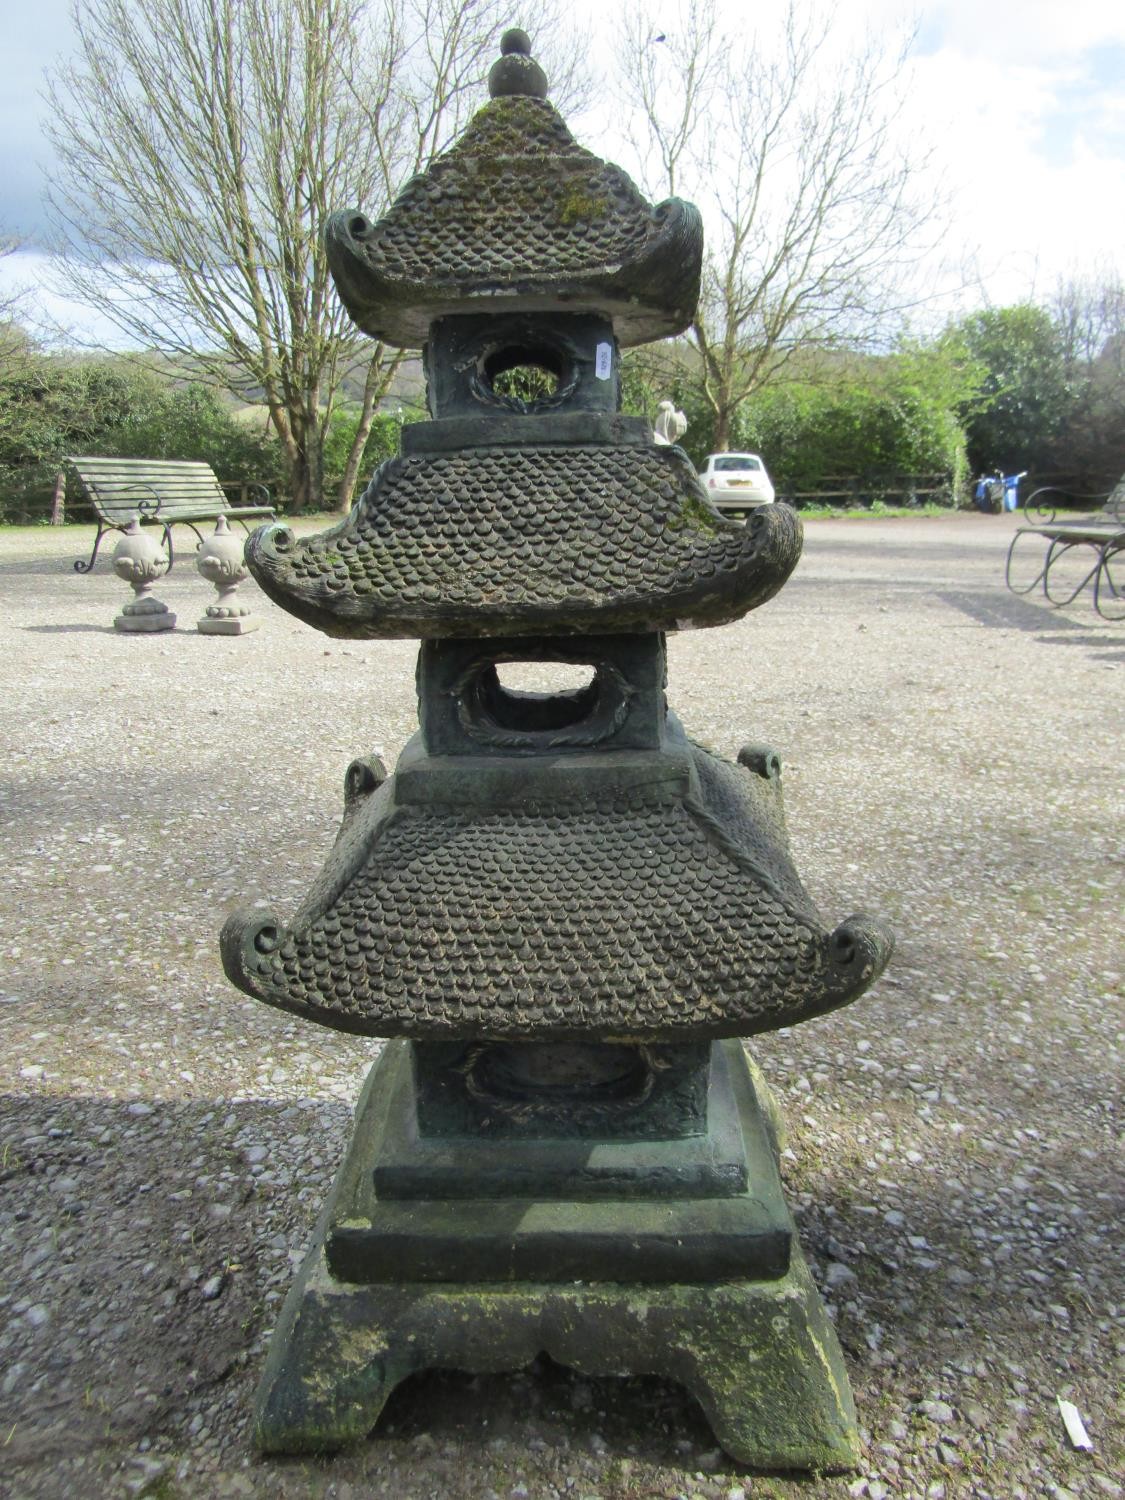 A weathered green painted cast composition stone sectional garden pagoda ornament, 105 cm high